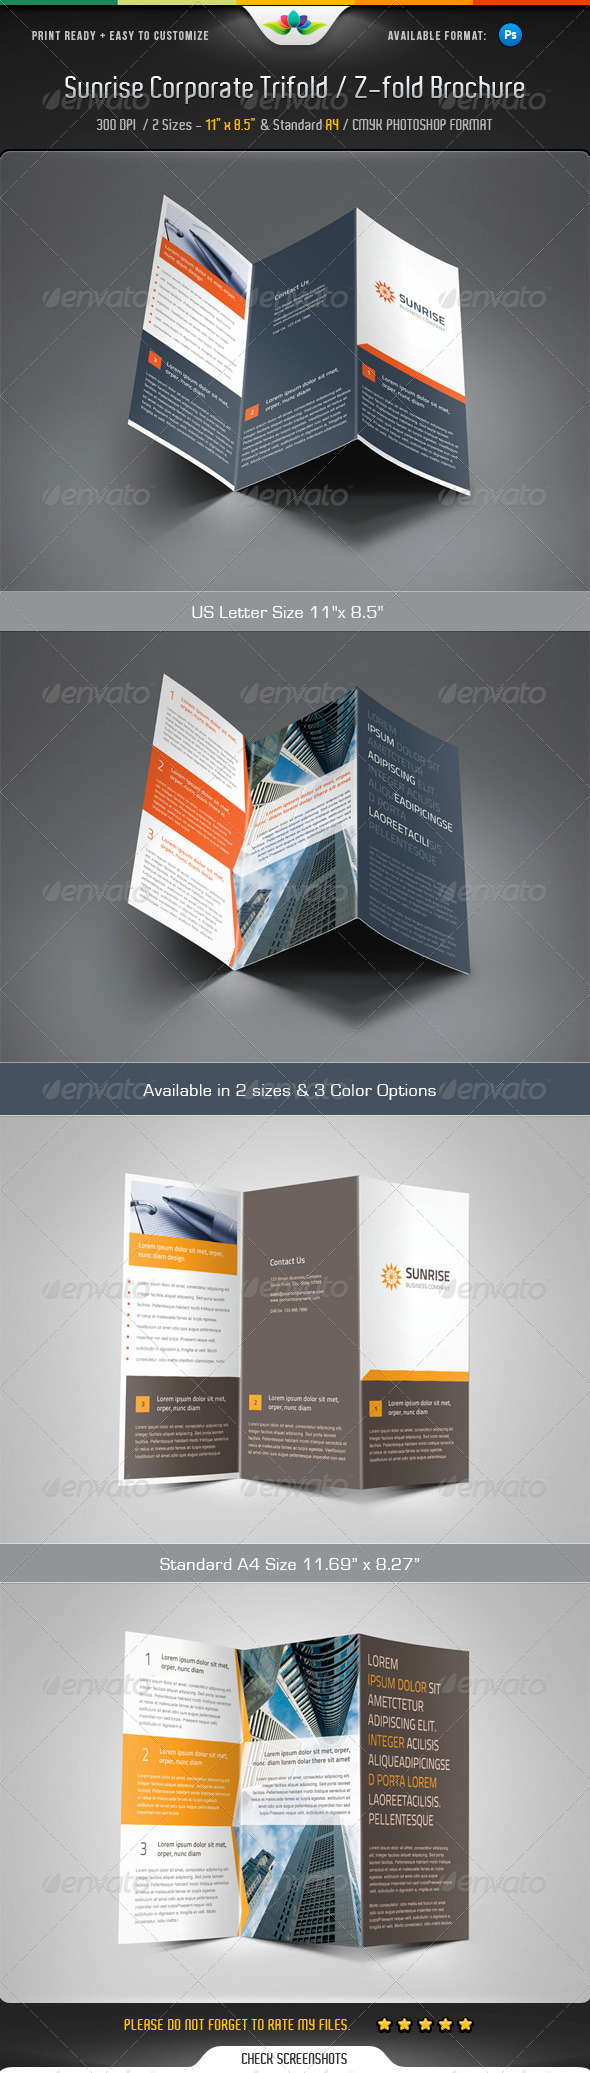 Z Fold Brochure Templates From Graphicriver With Z Fold Brochure Template Indesign